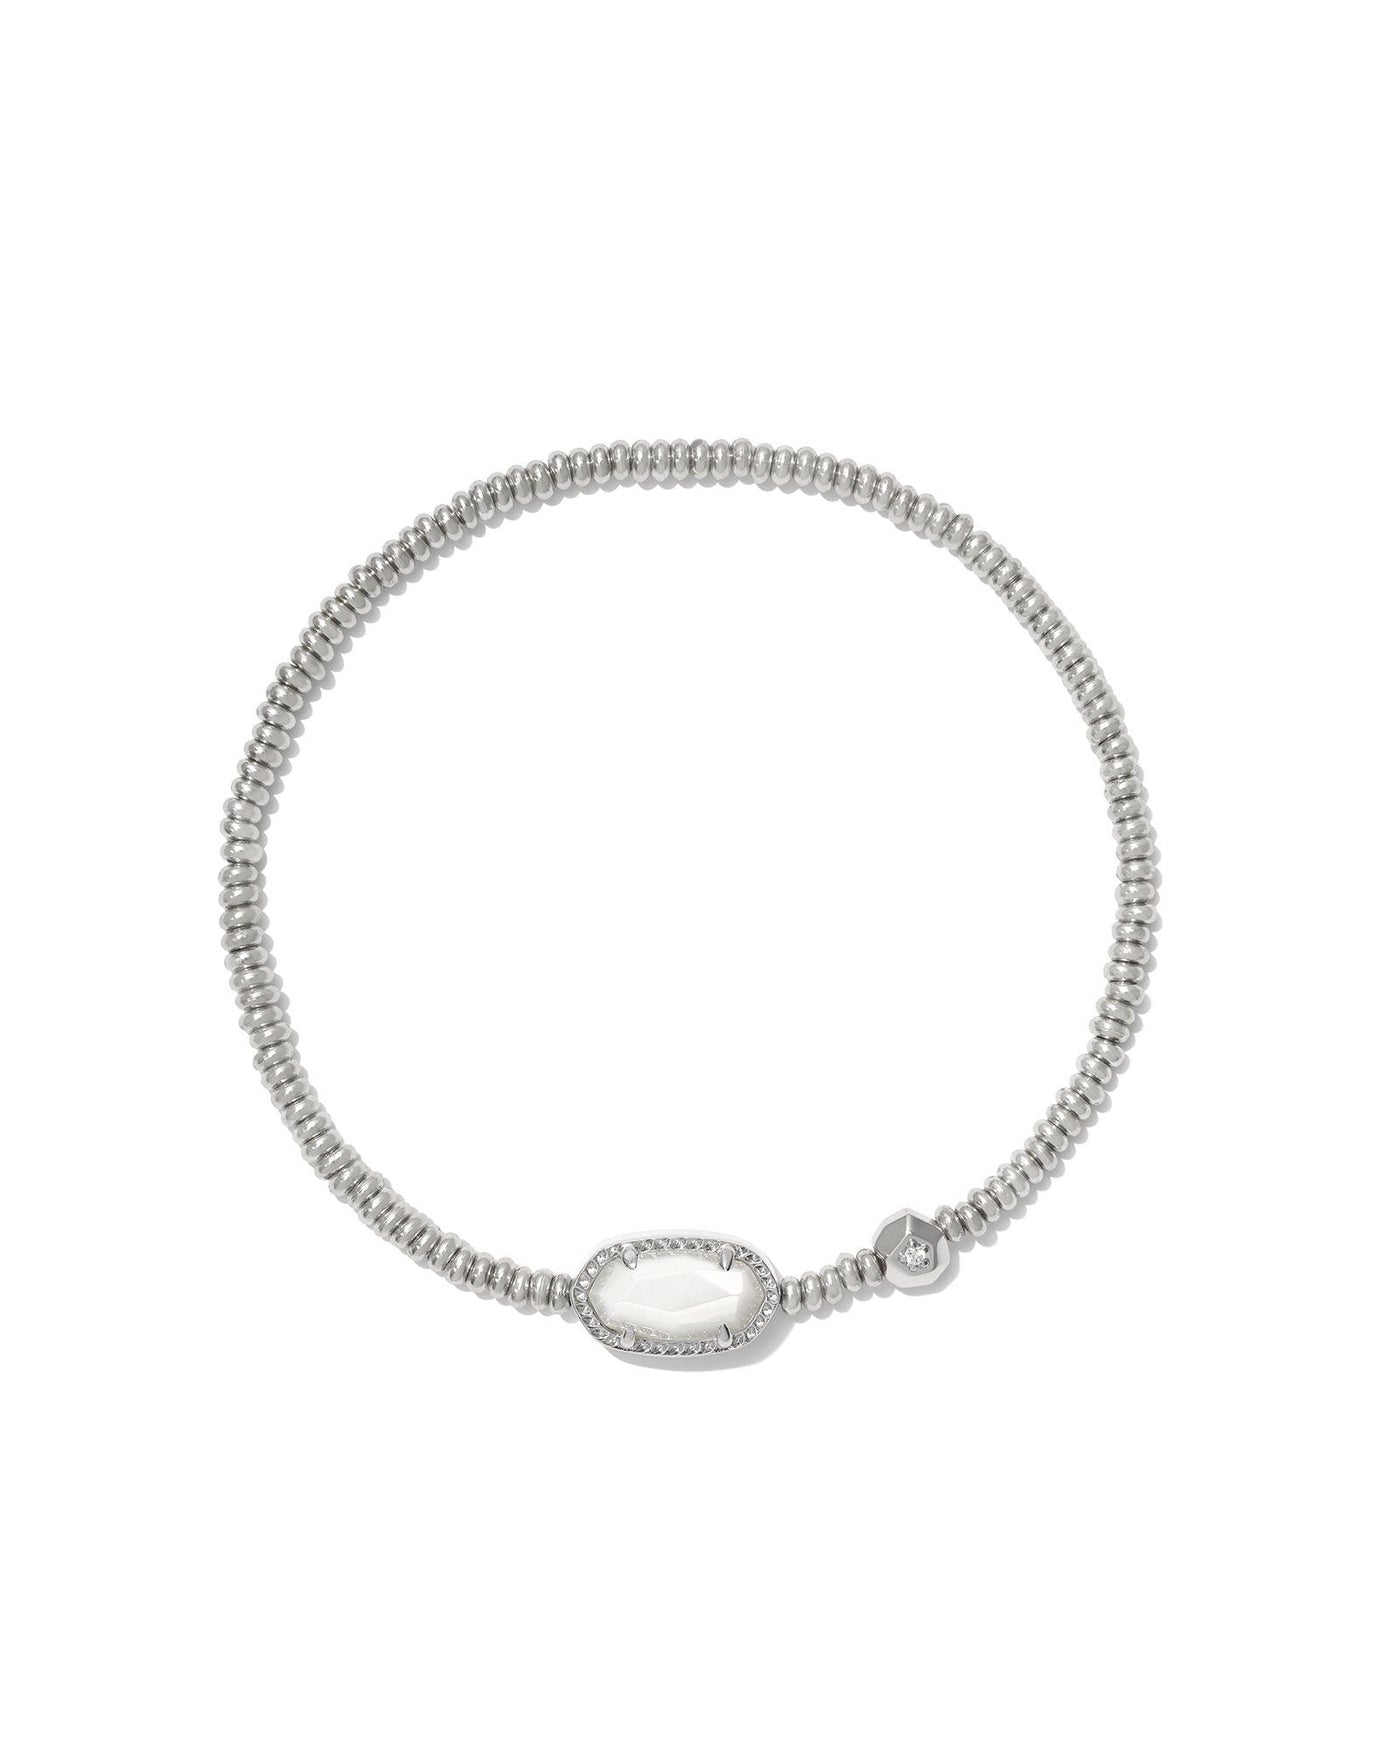 Kendra Scott Grayson Stretch Bracelet in Silver Mother of Pearl on white background, front view.